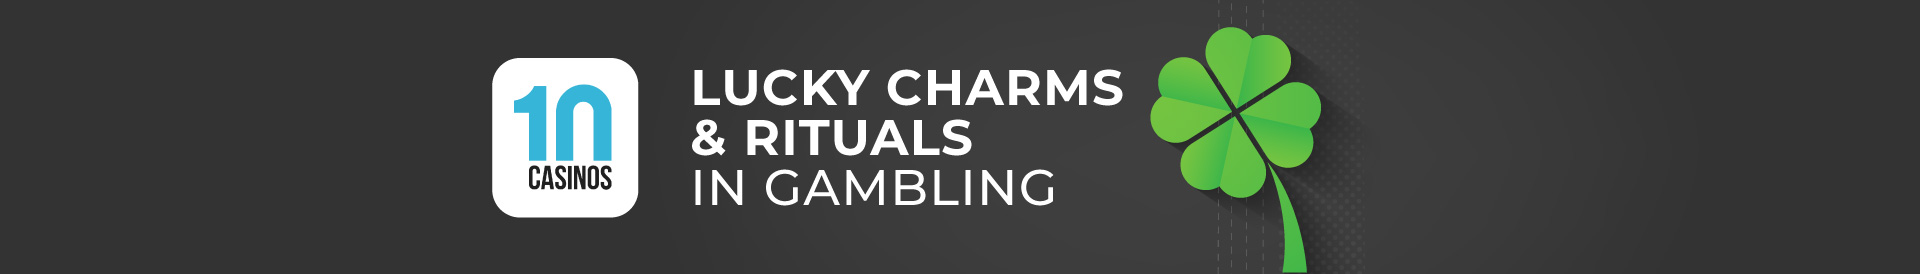 top 10 lucky charms and rituals in gambling desktop